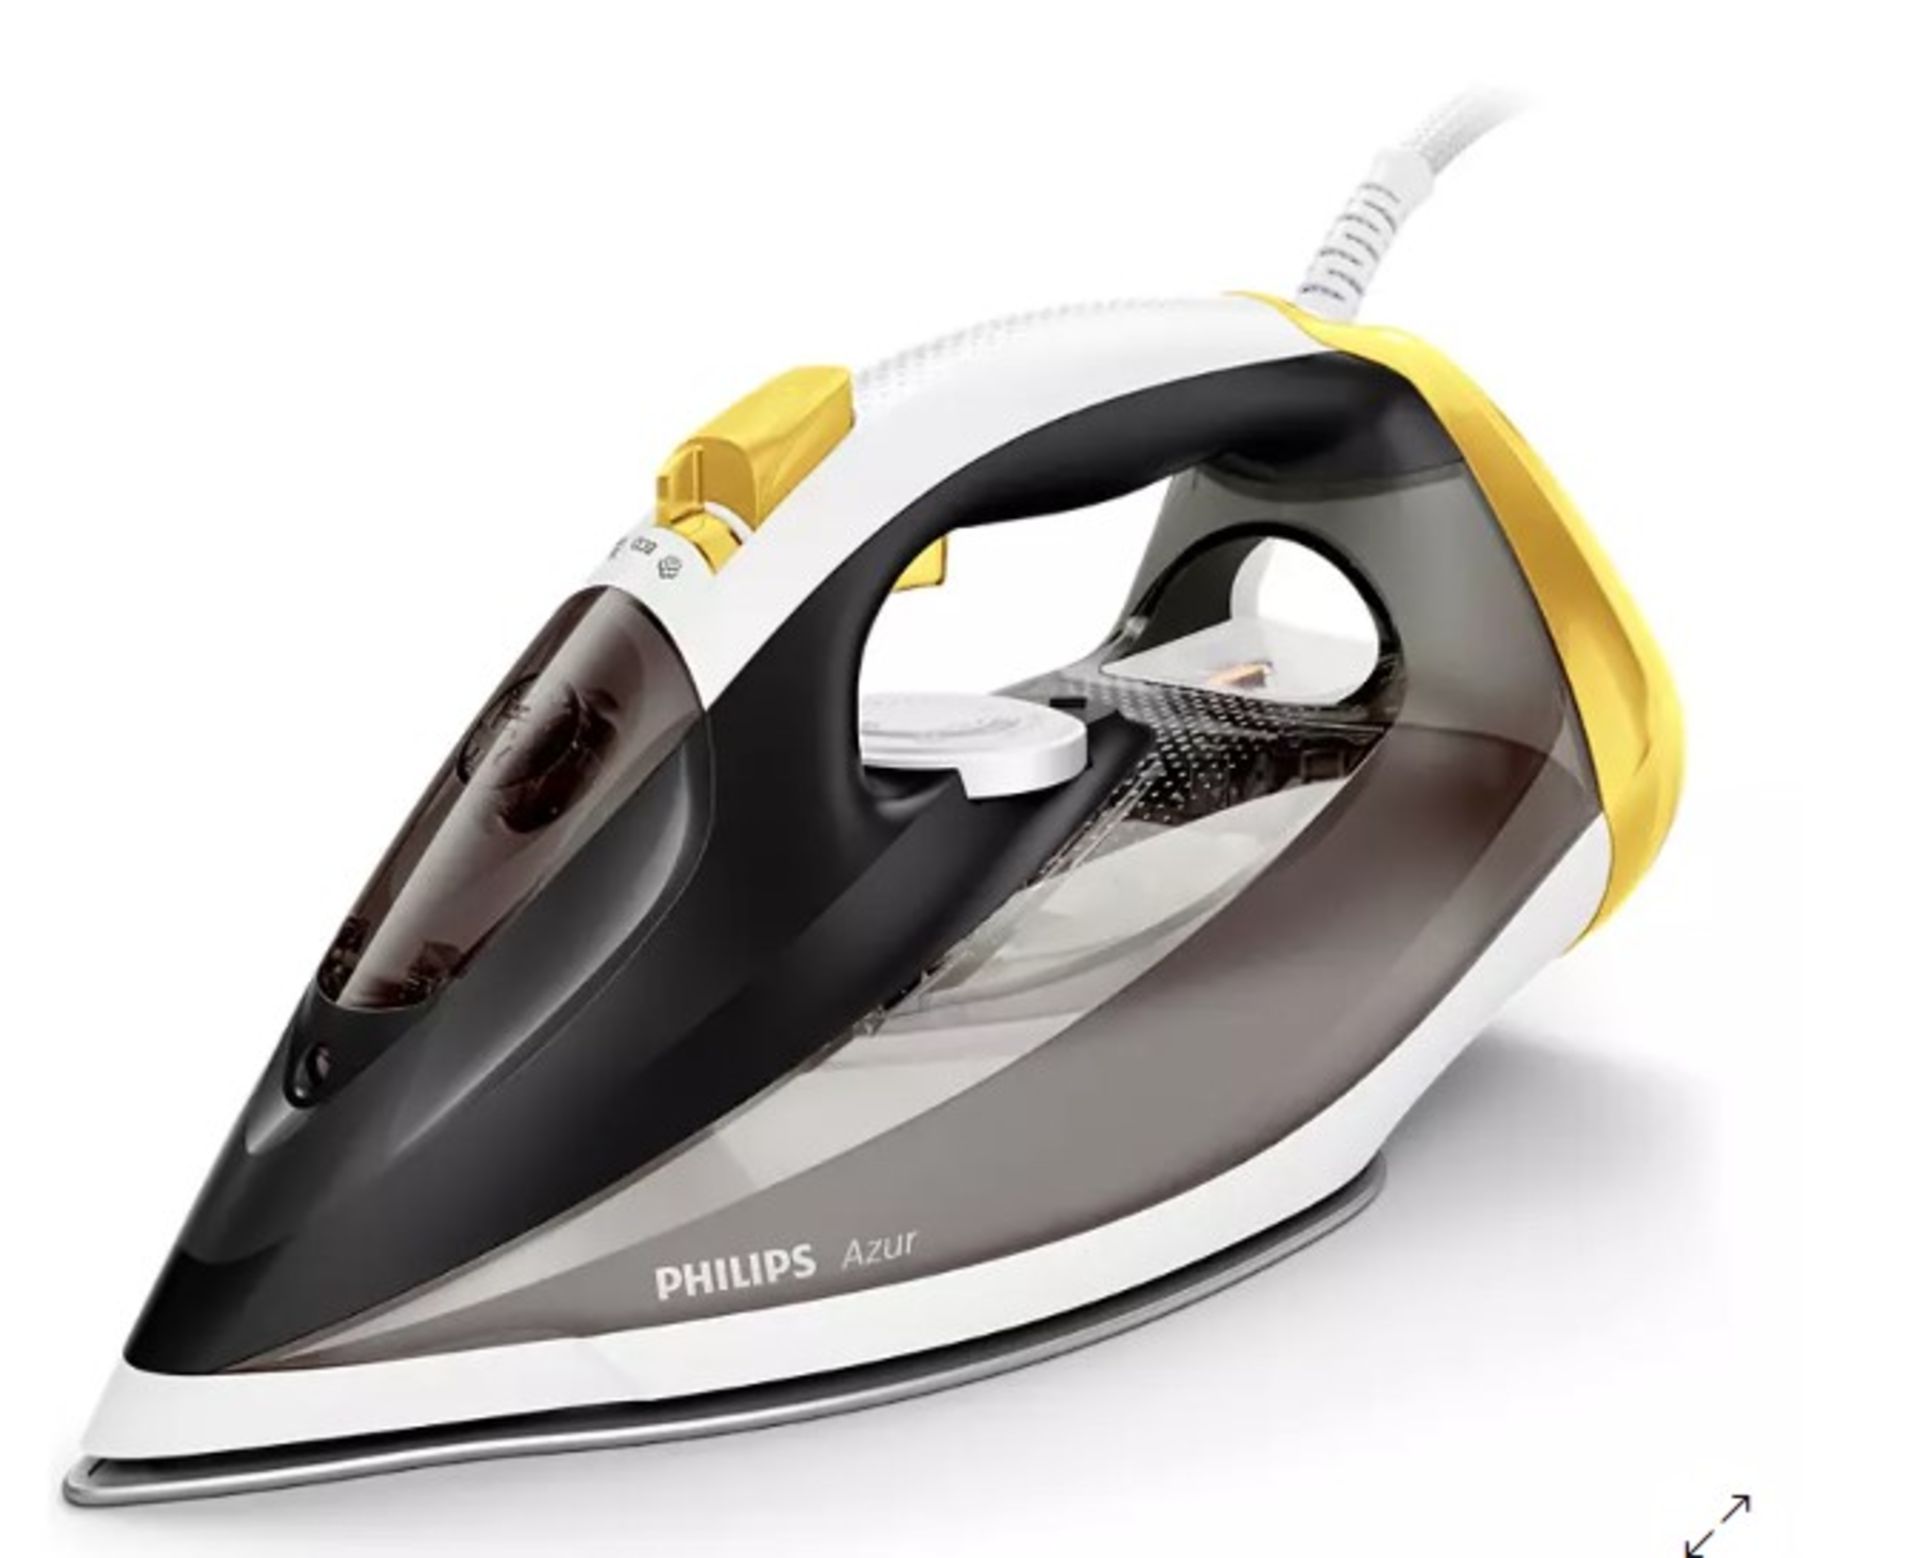 Philips azur steam iron. Thanks to our innovative design, the calc particles are easily broken and